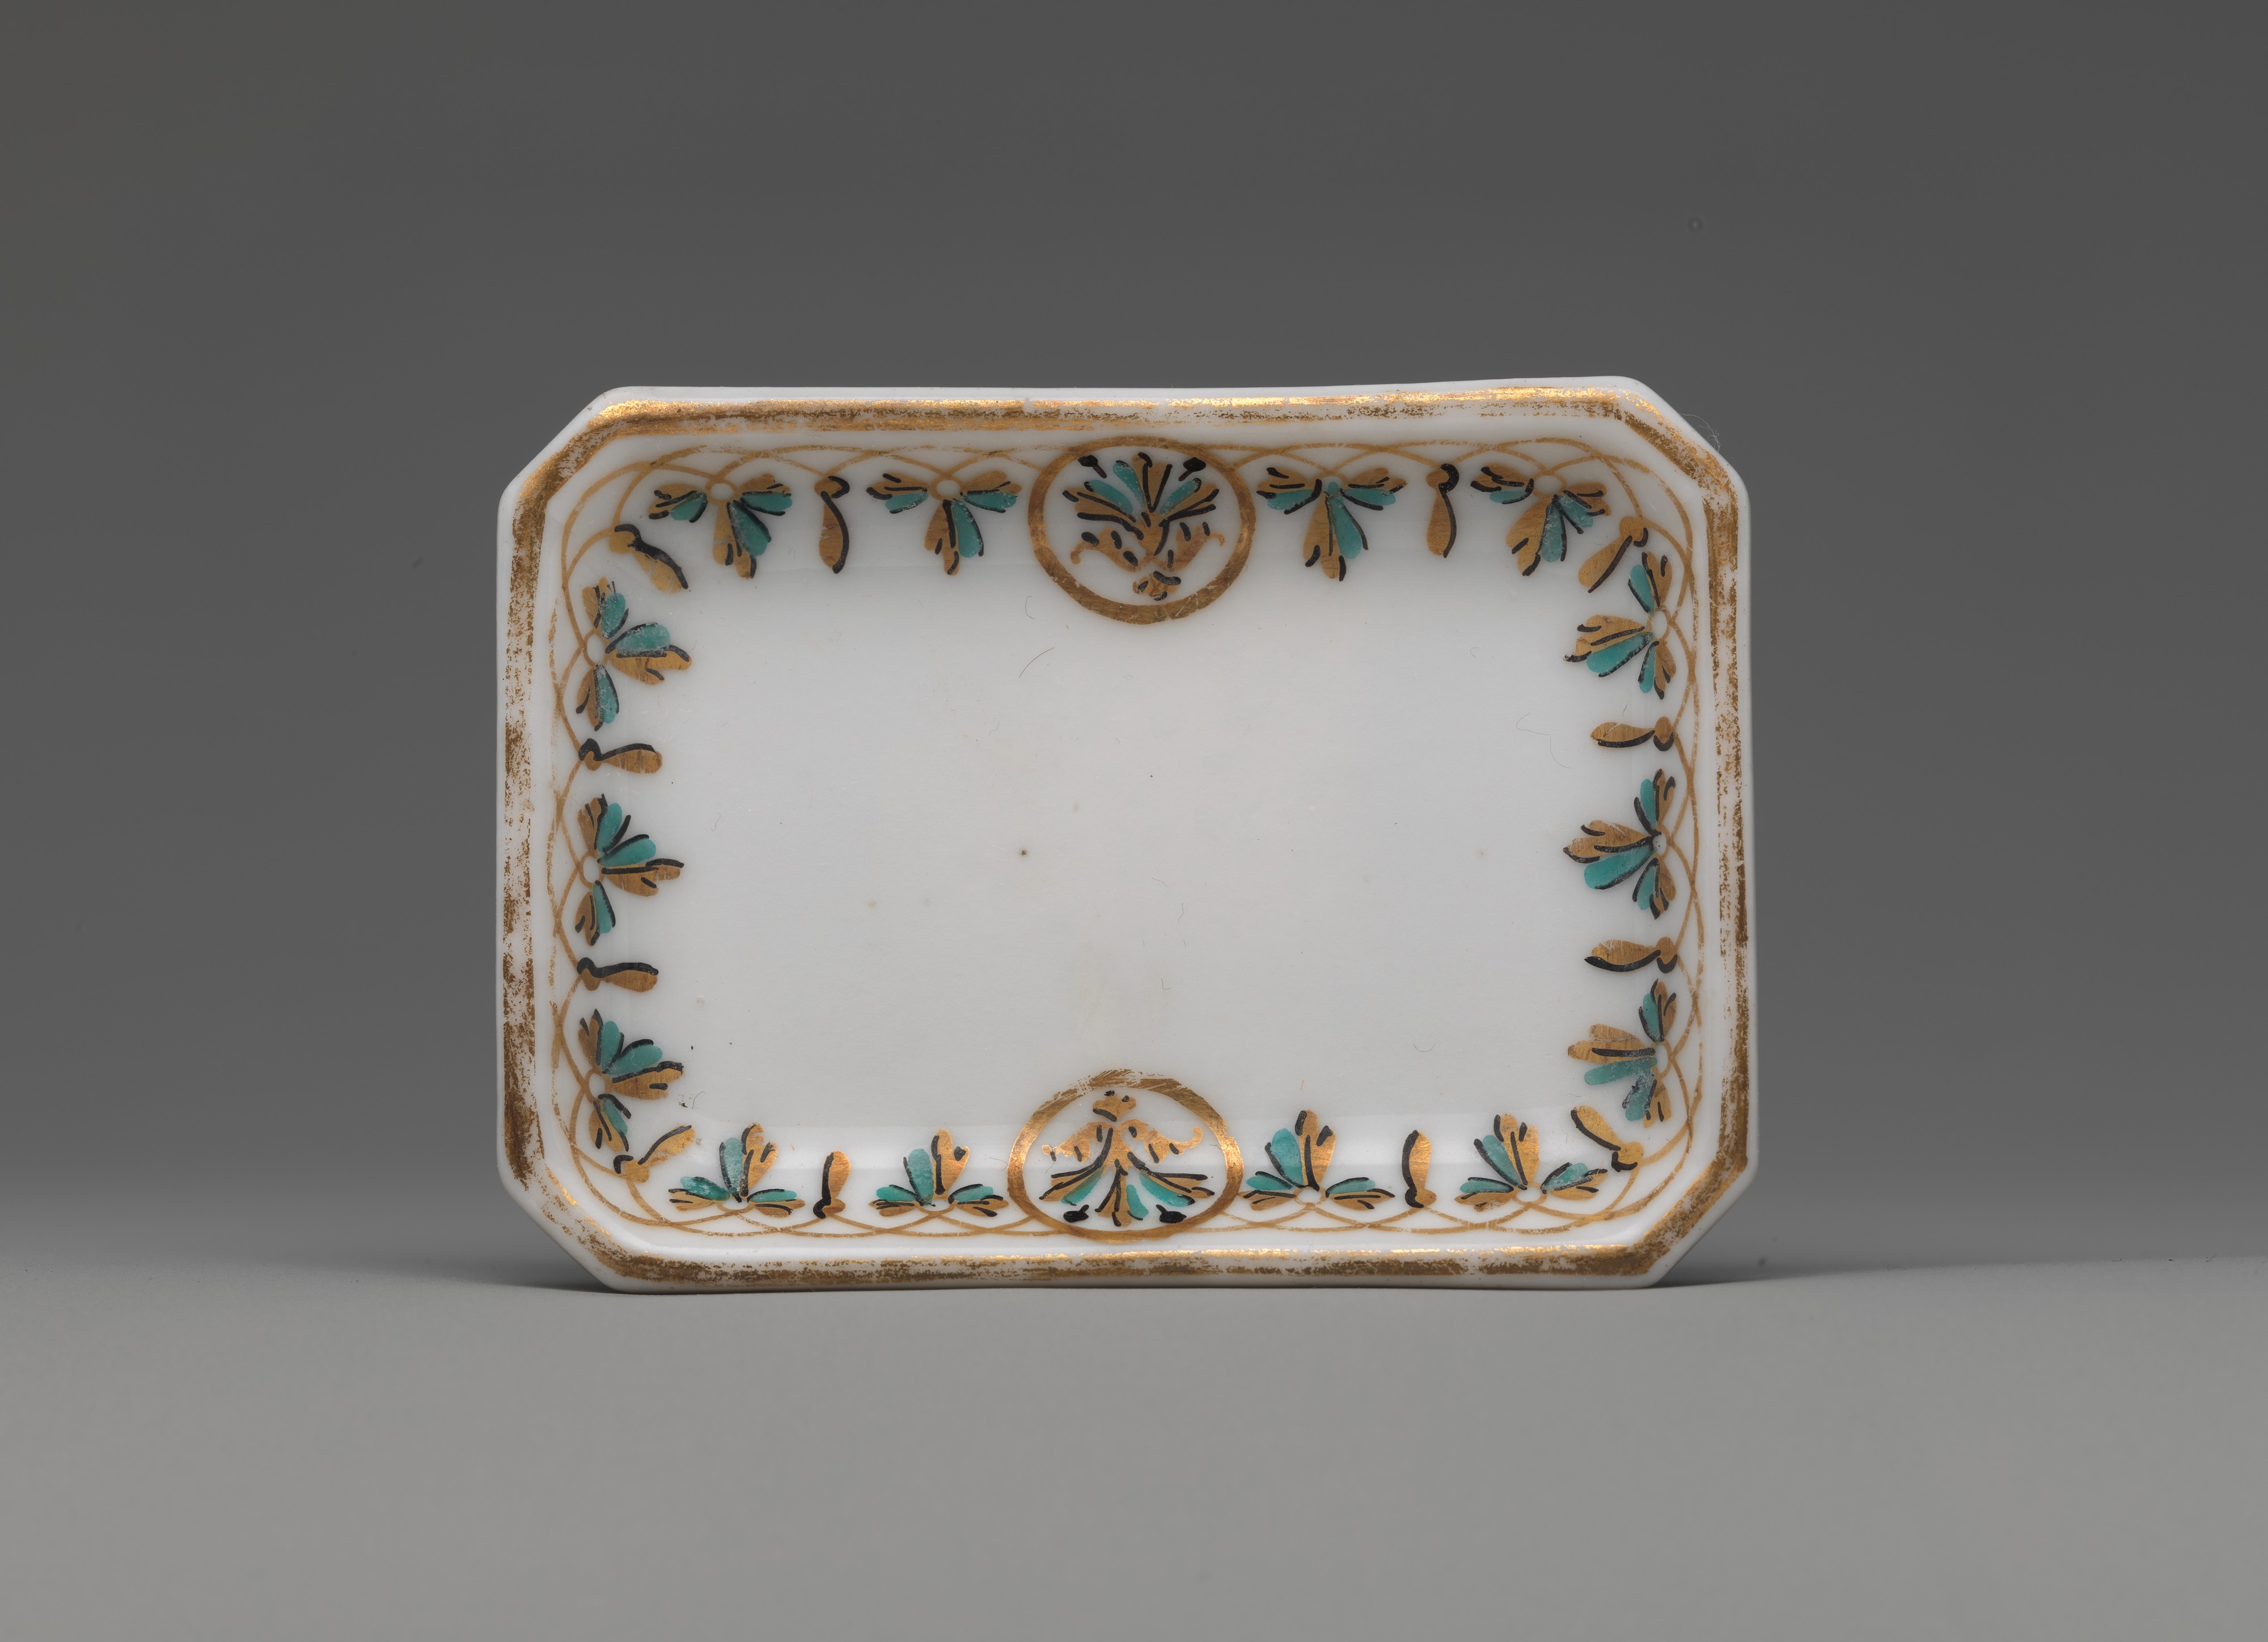 Union Porcelain Works Artworks collected in Metmuseum